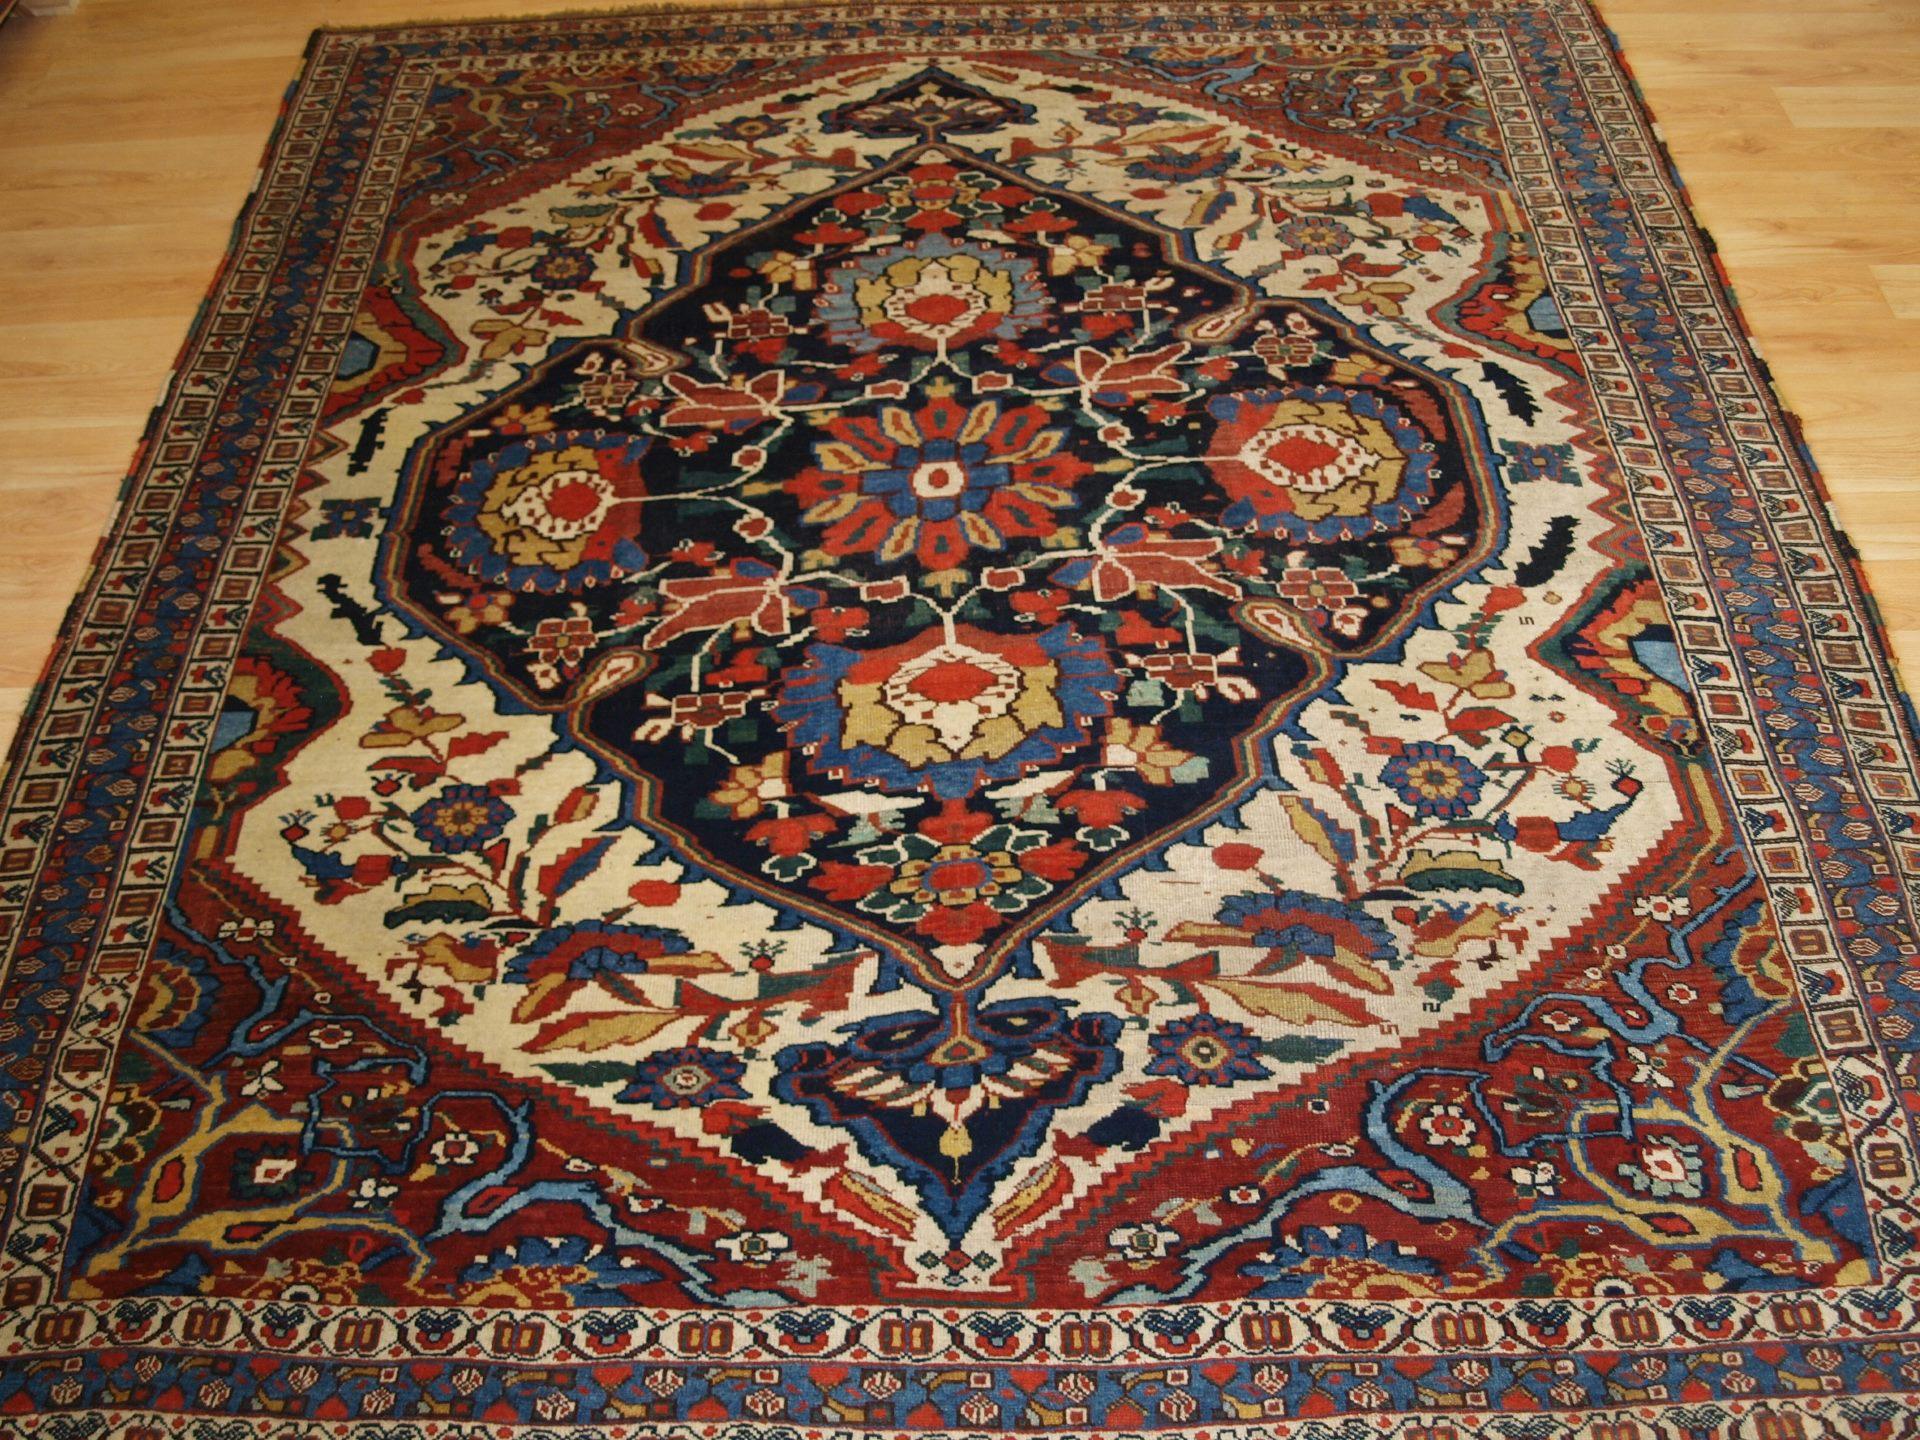 
Size: 6ft 7in x 5ft 11in (200 x 180cm).

Antique Khamseh tribal rug of beautiful design and colour.

Circa 1870.

A scarce example of one of the most beautiful of all nomadic tribal designs woven by the Khamseh tribe. A few known rugs of this